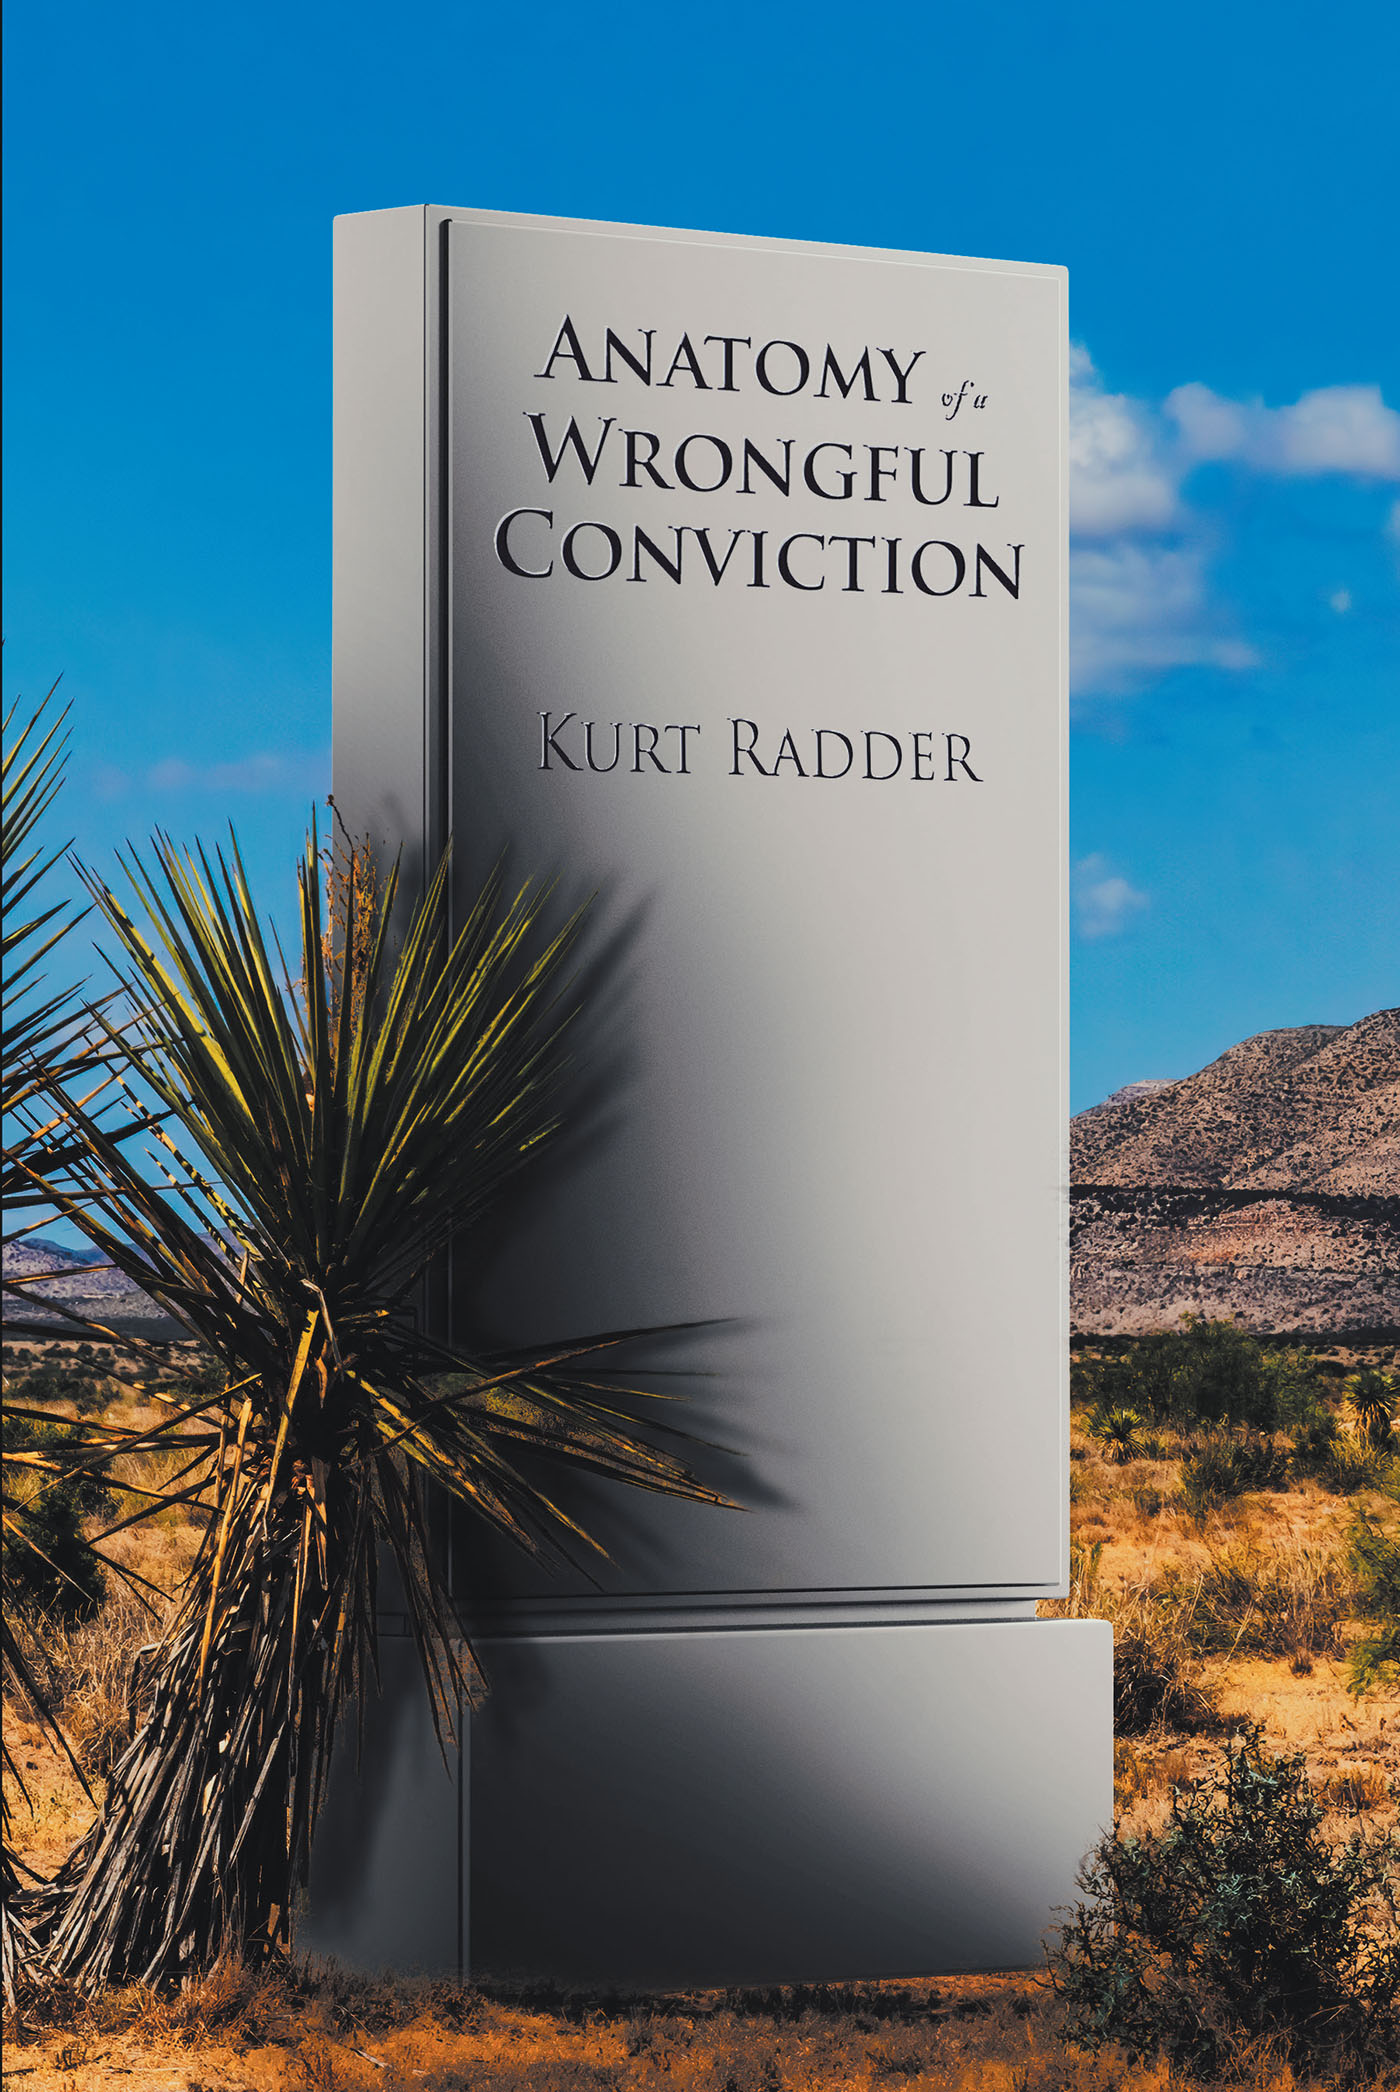 Author Kurt Radder’s New Book, "Anatomy of a Wrongful Conviction," is a Deeply Impactful Work That Sheds Light on the Harsh Reality of the Criminal Justice System